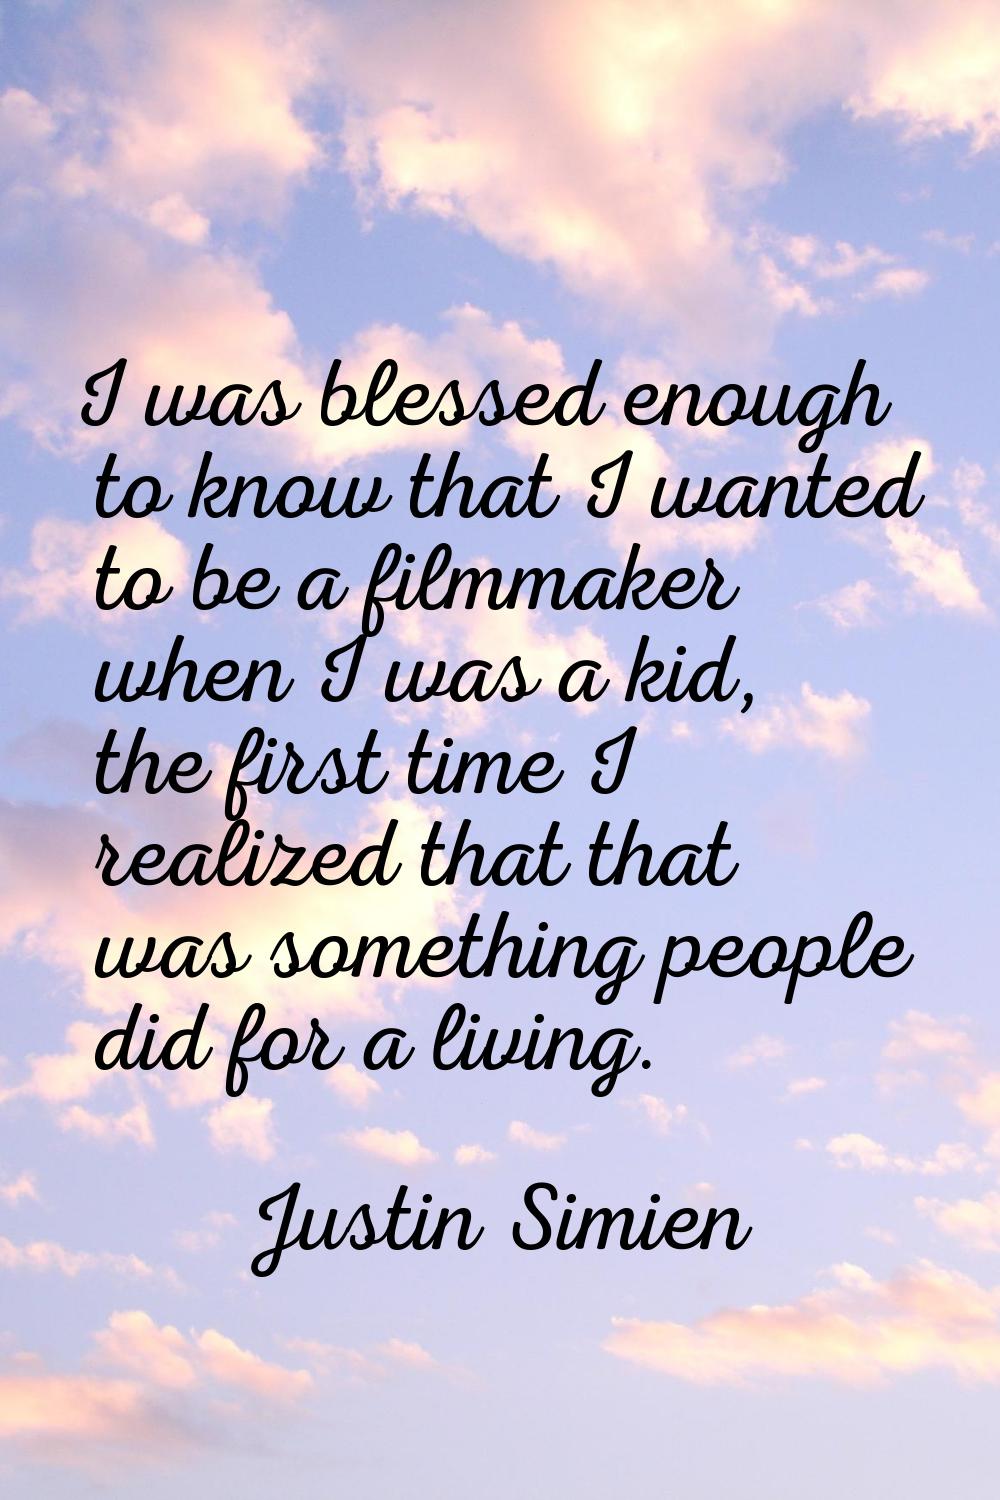 I was blessed enough to know that I wanted to be a filmmaker when I was a kid, the first time I rea